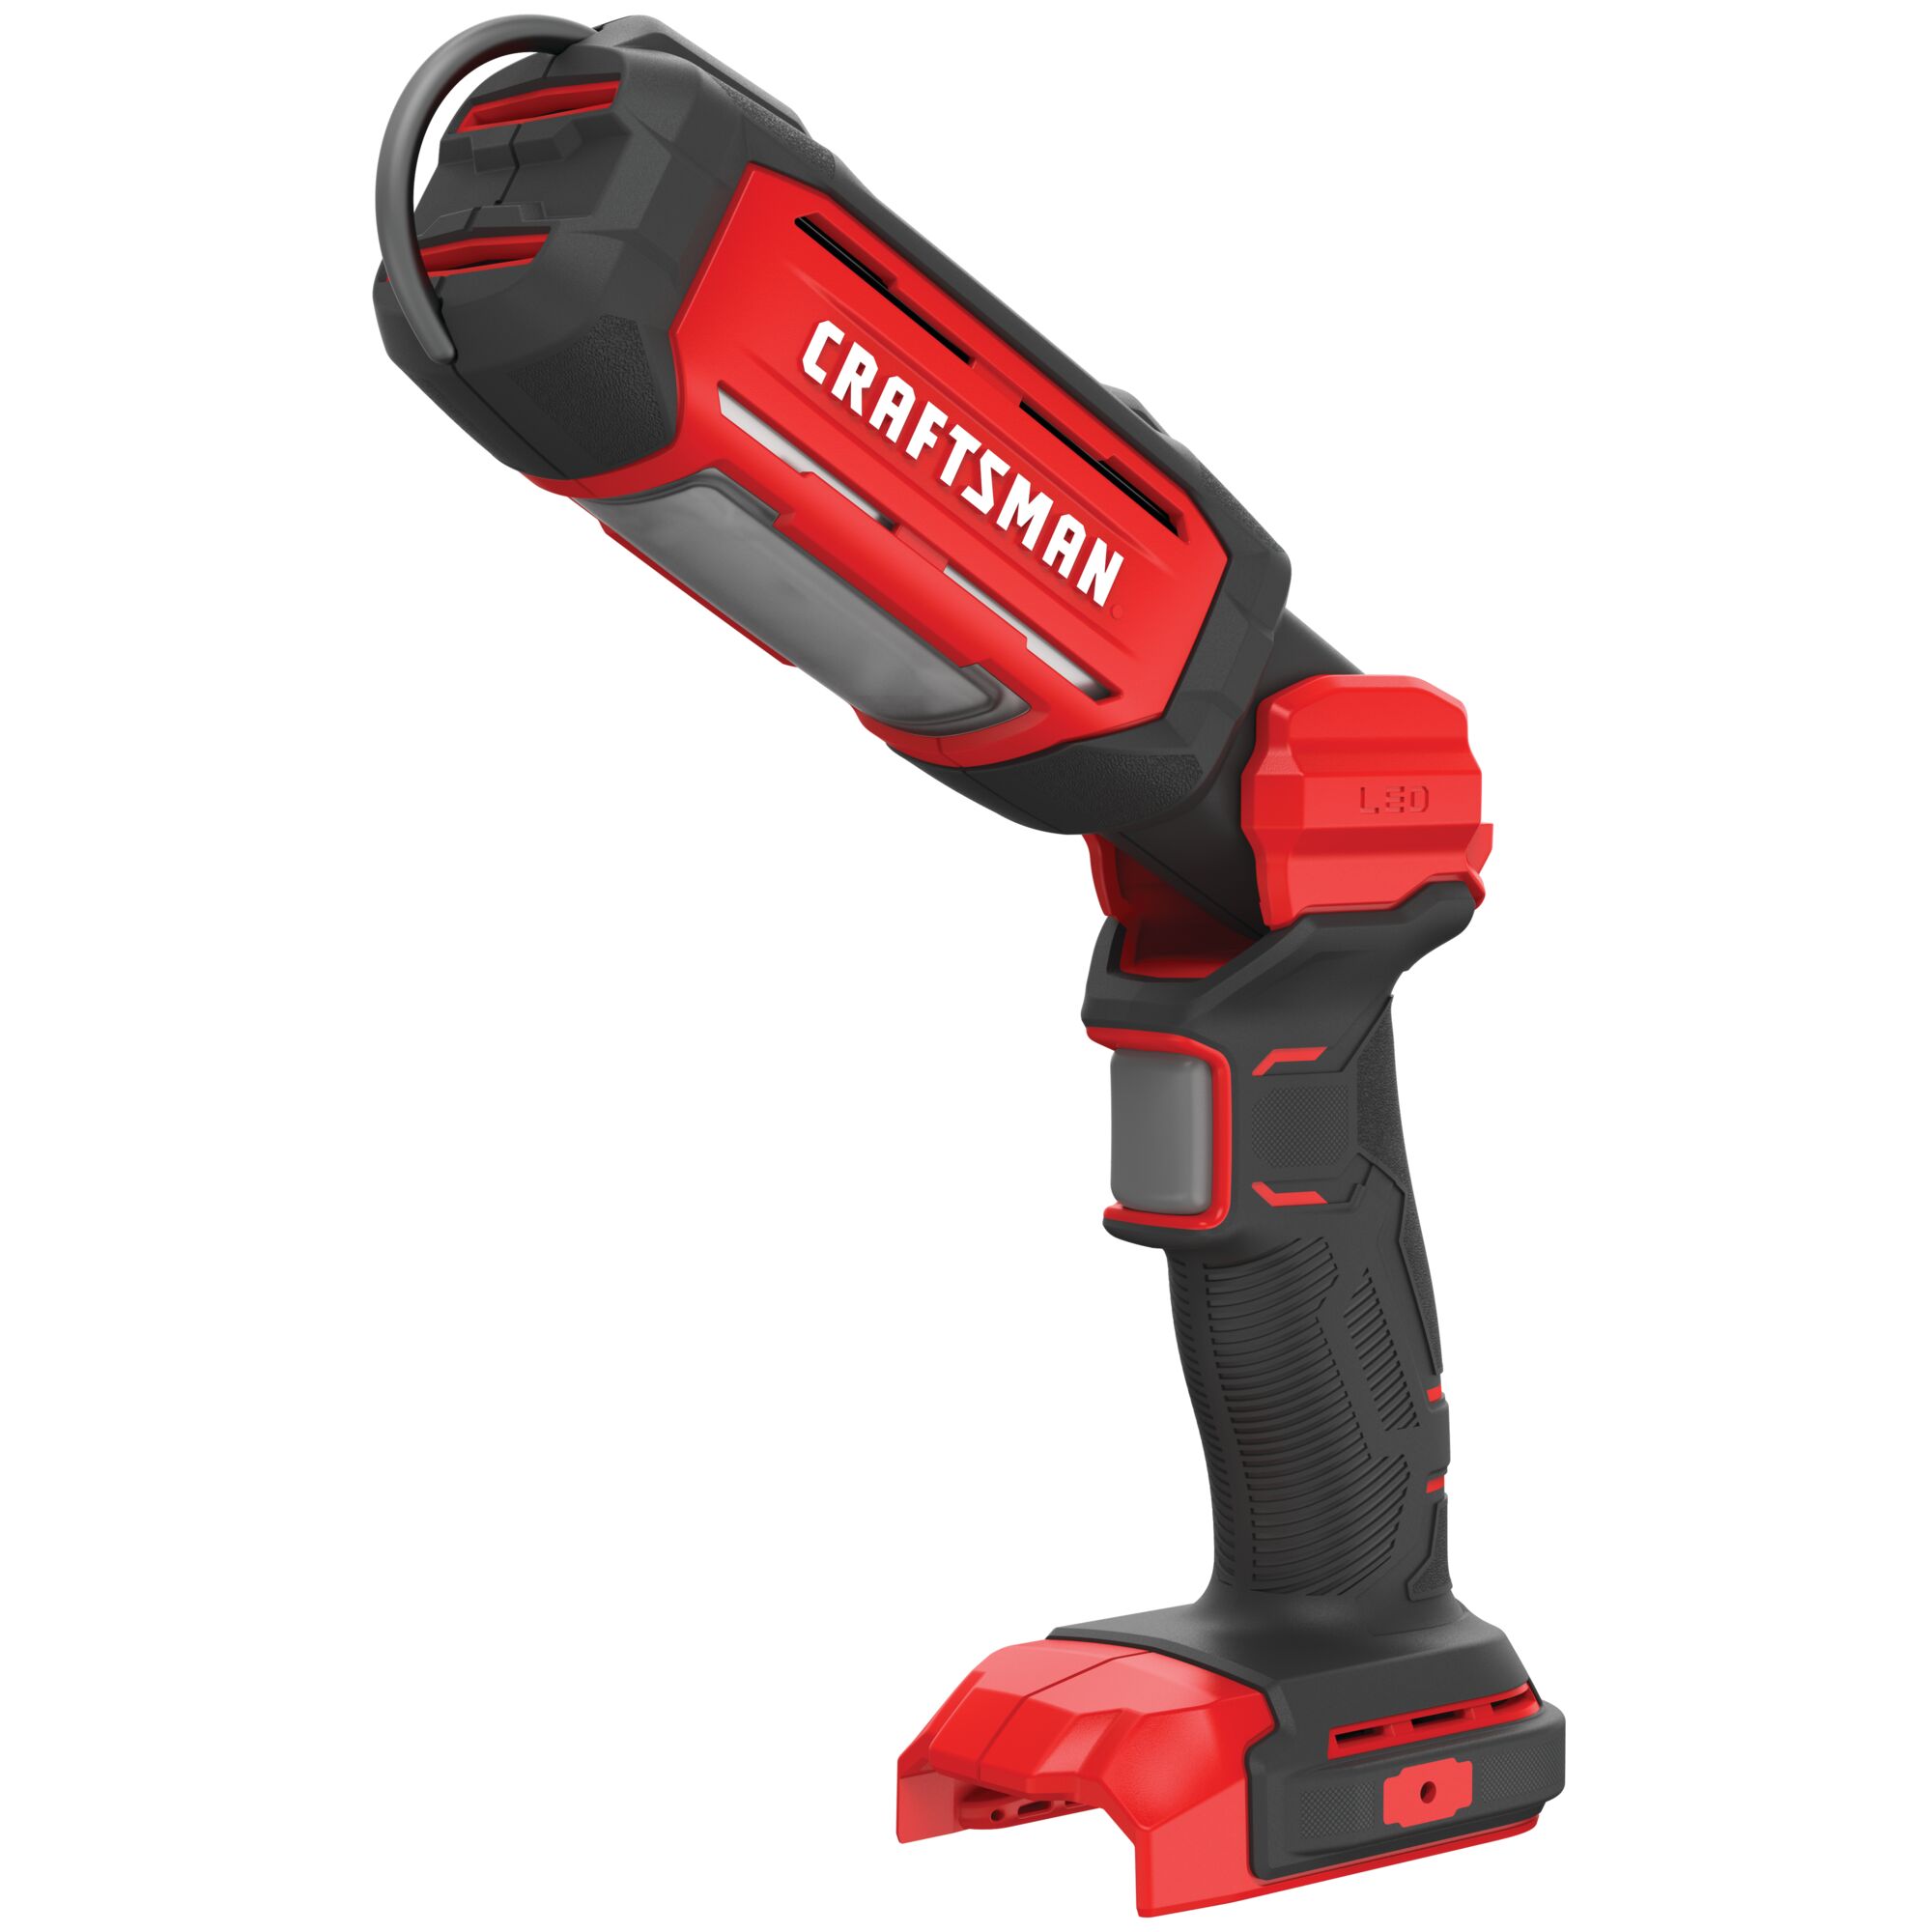 Cordless led hanging work light tool only.